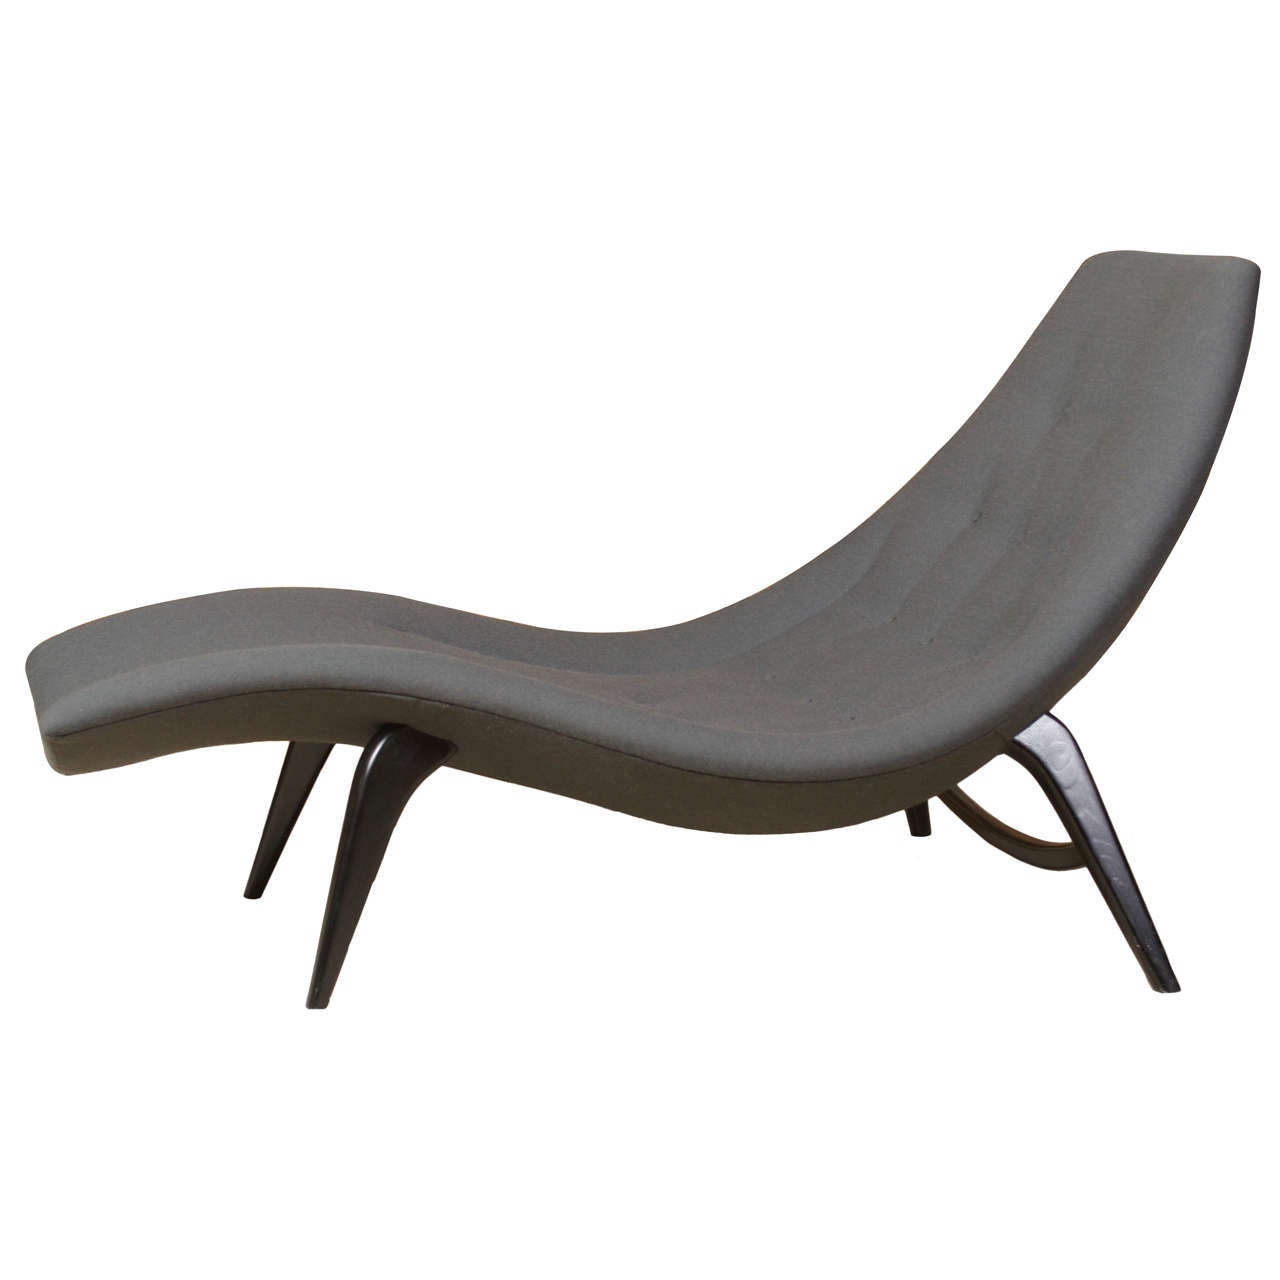 60's Chaise Lounger In Style Of Adrian Pearsall